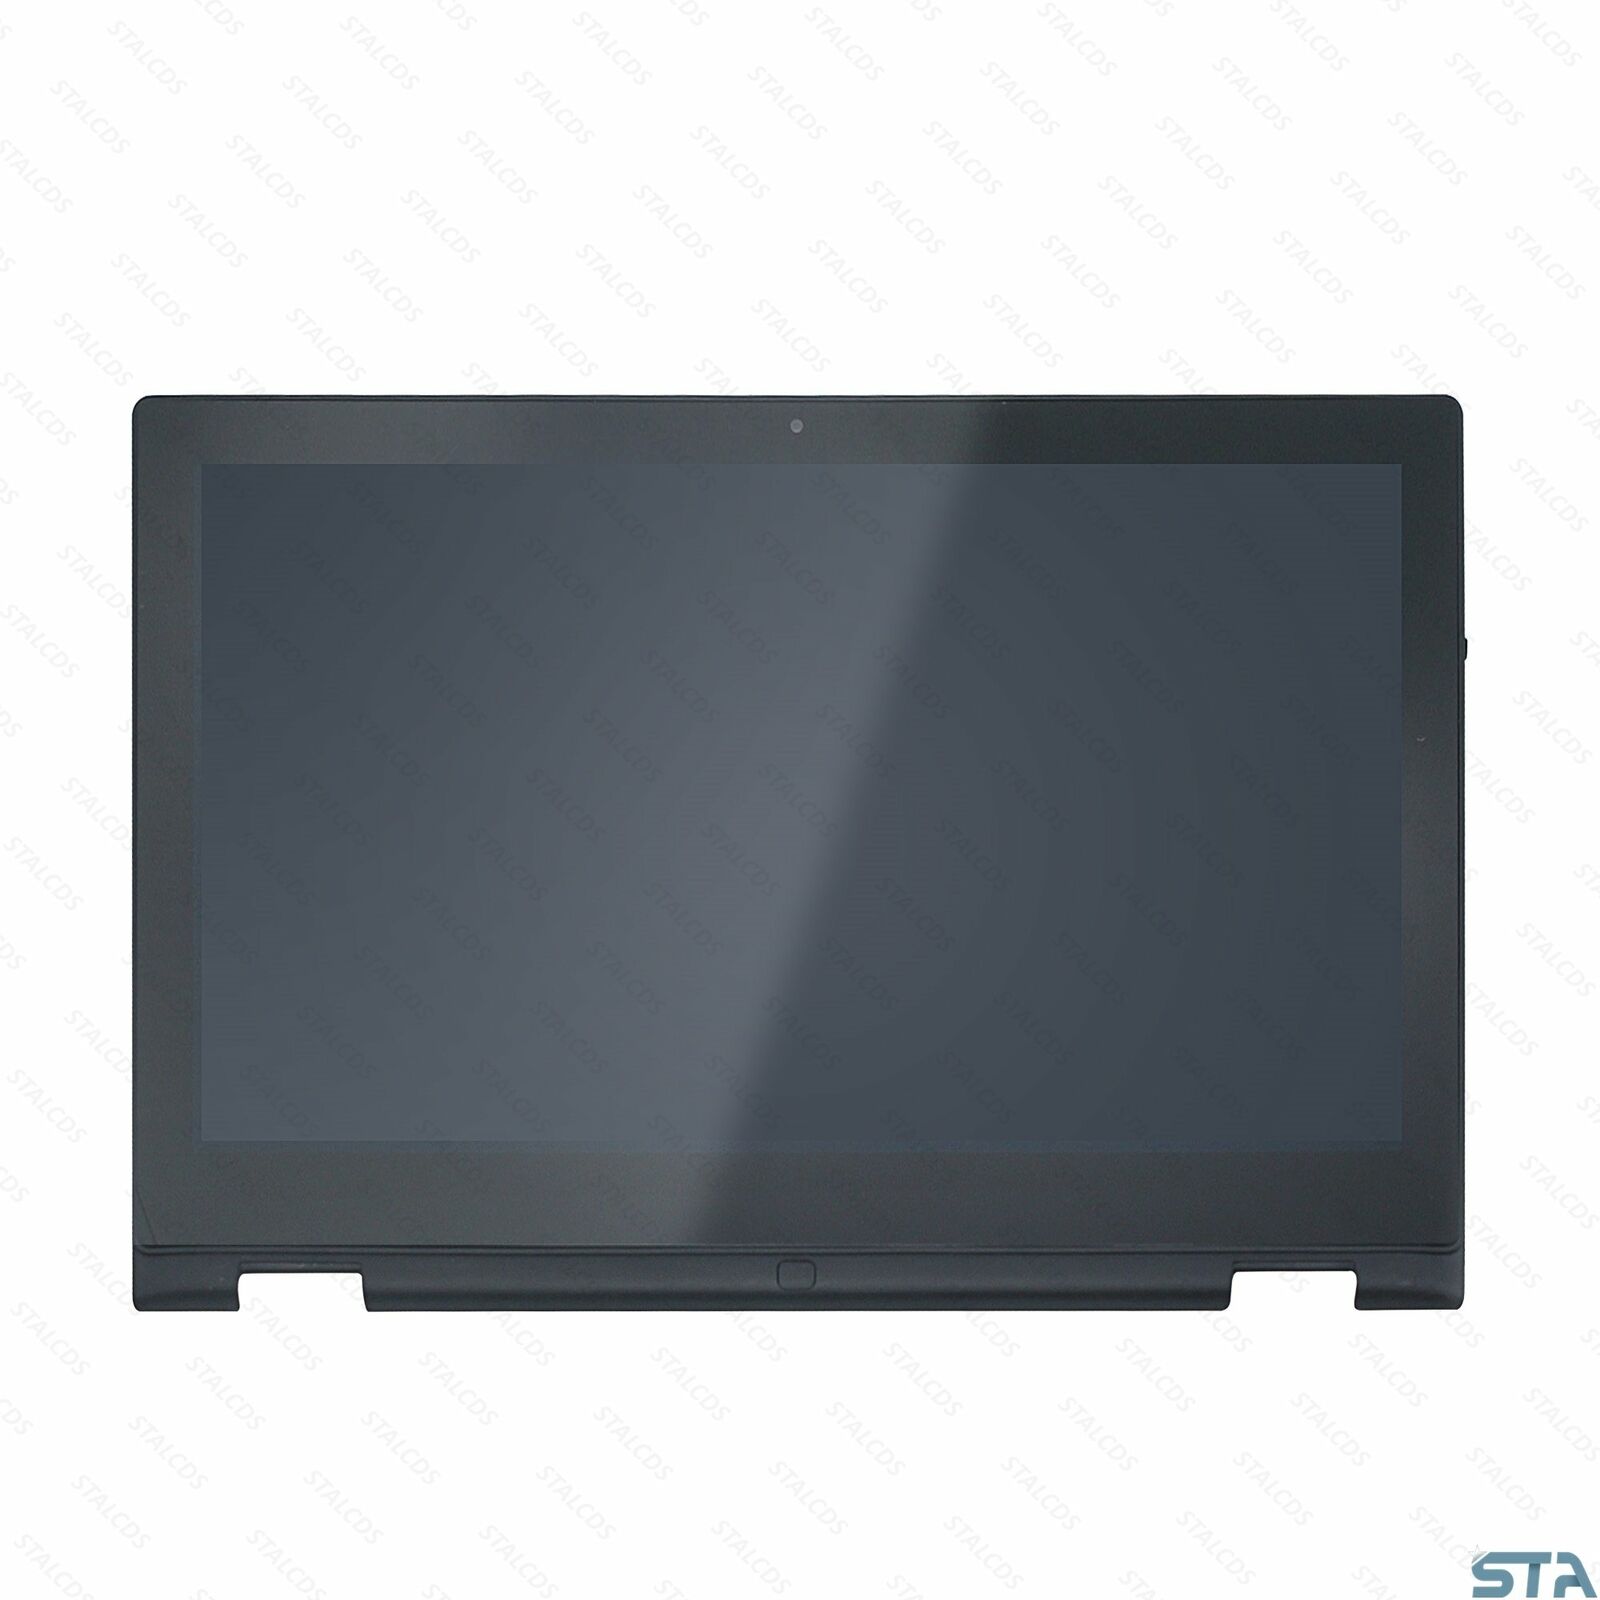 13.3 FHD LCD TouchScreen Digitizer Display for Dell Inspiron 13 7000 7359